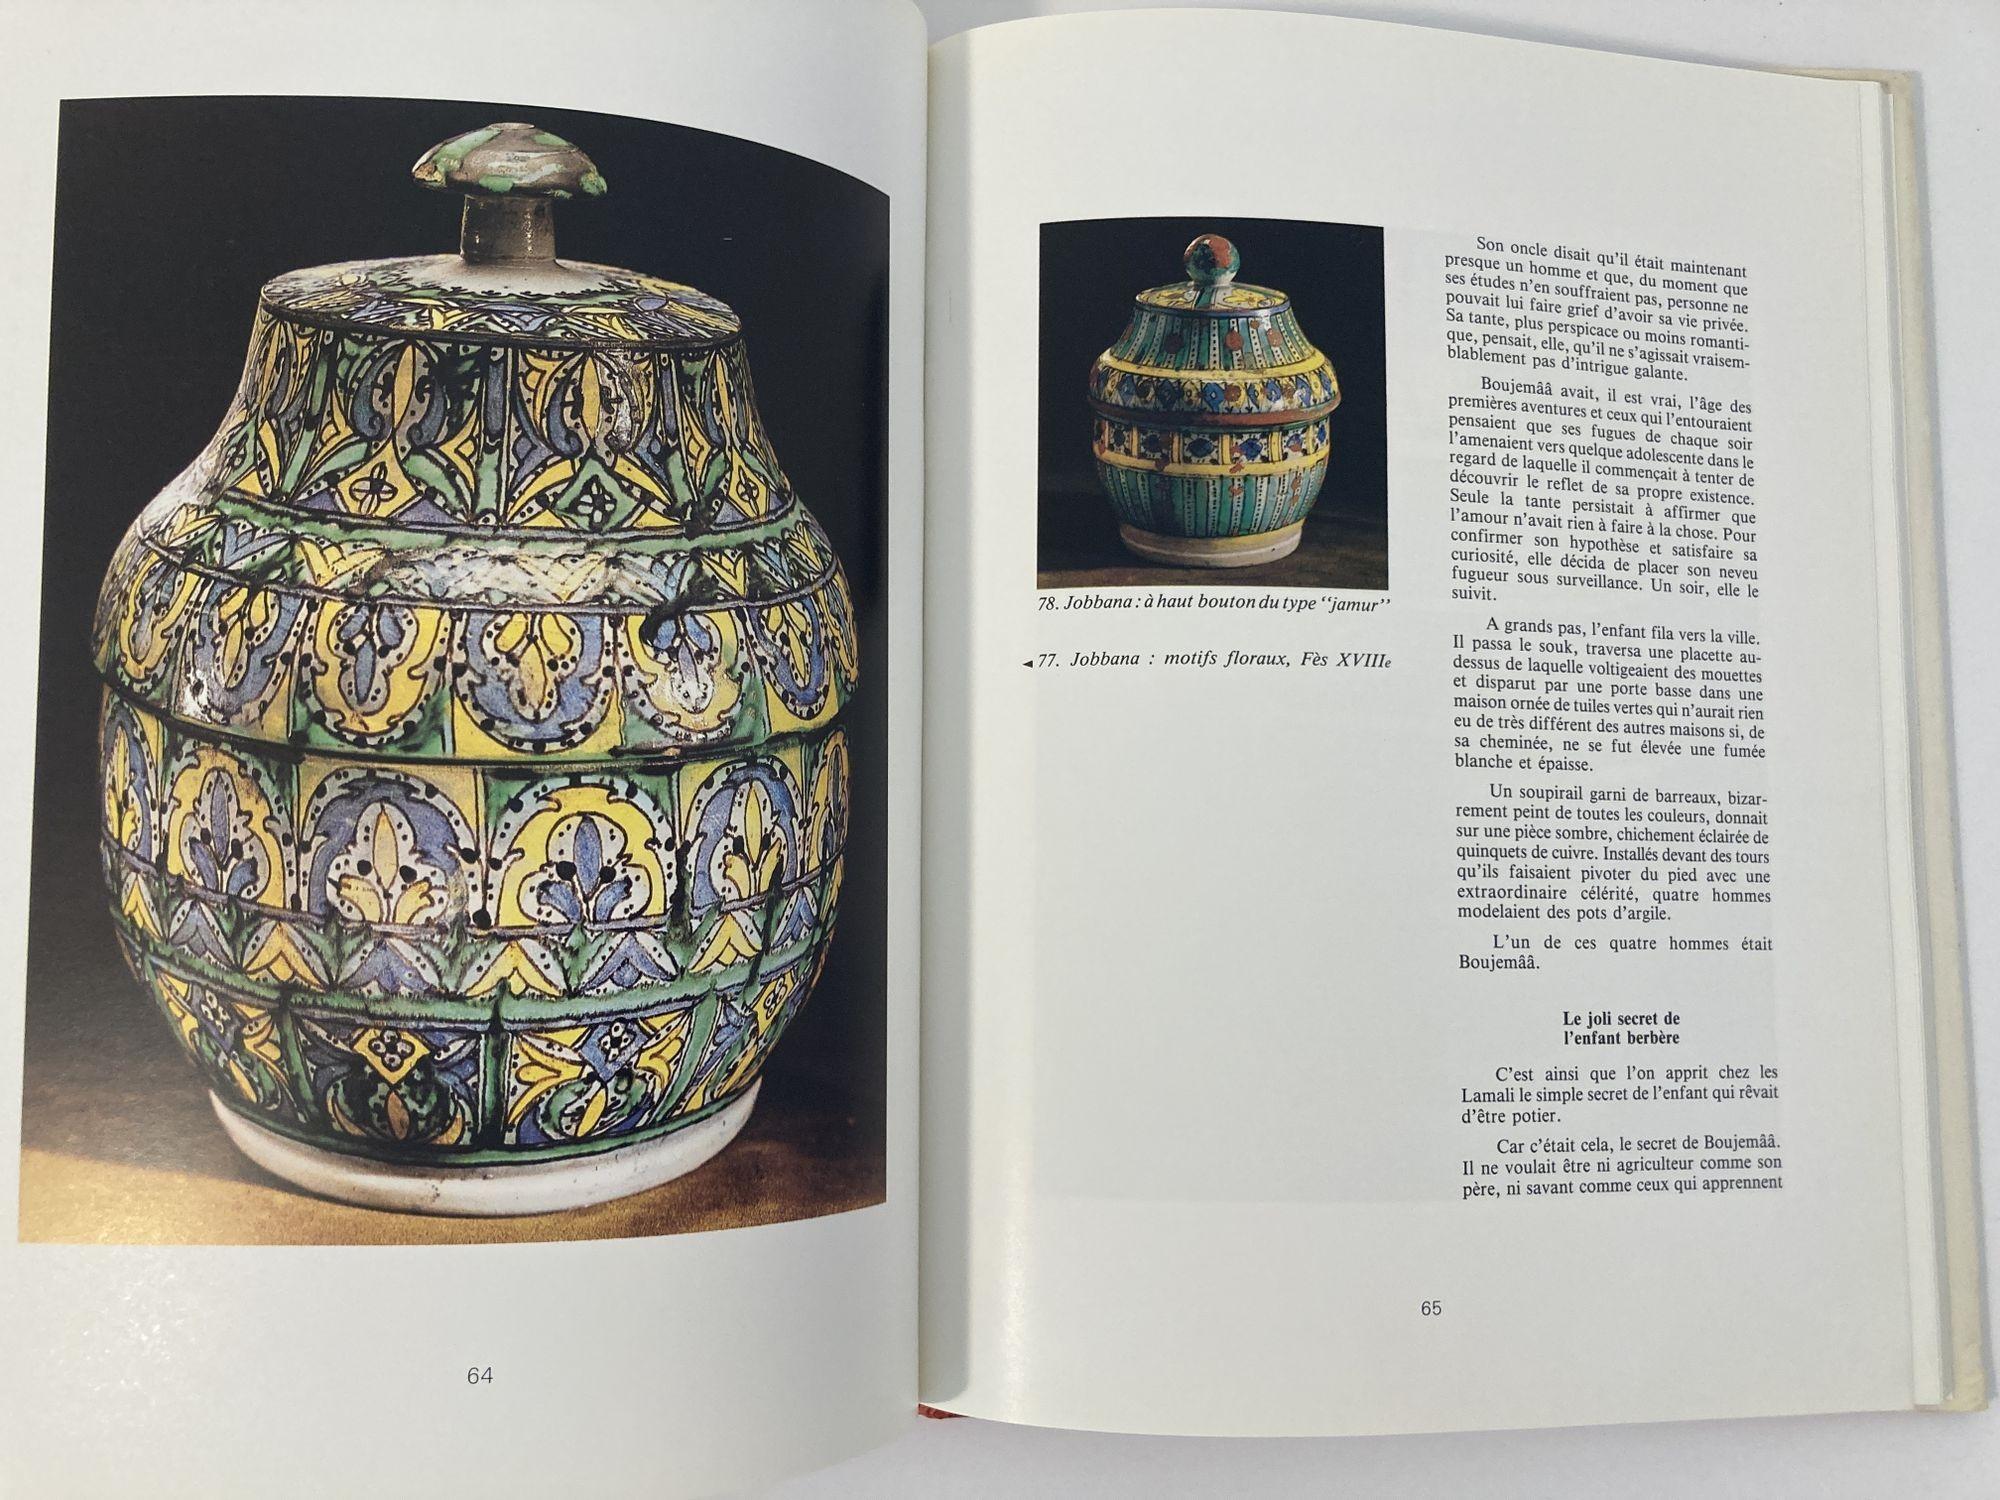 Moroccan Pottery La Poterie Marocaine by André Boukobza French Edition Hard For Sale 5